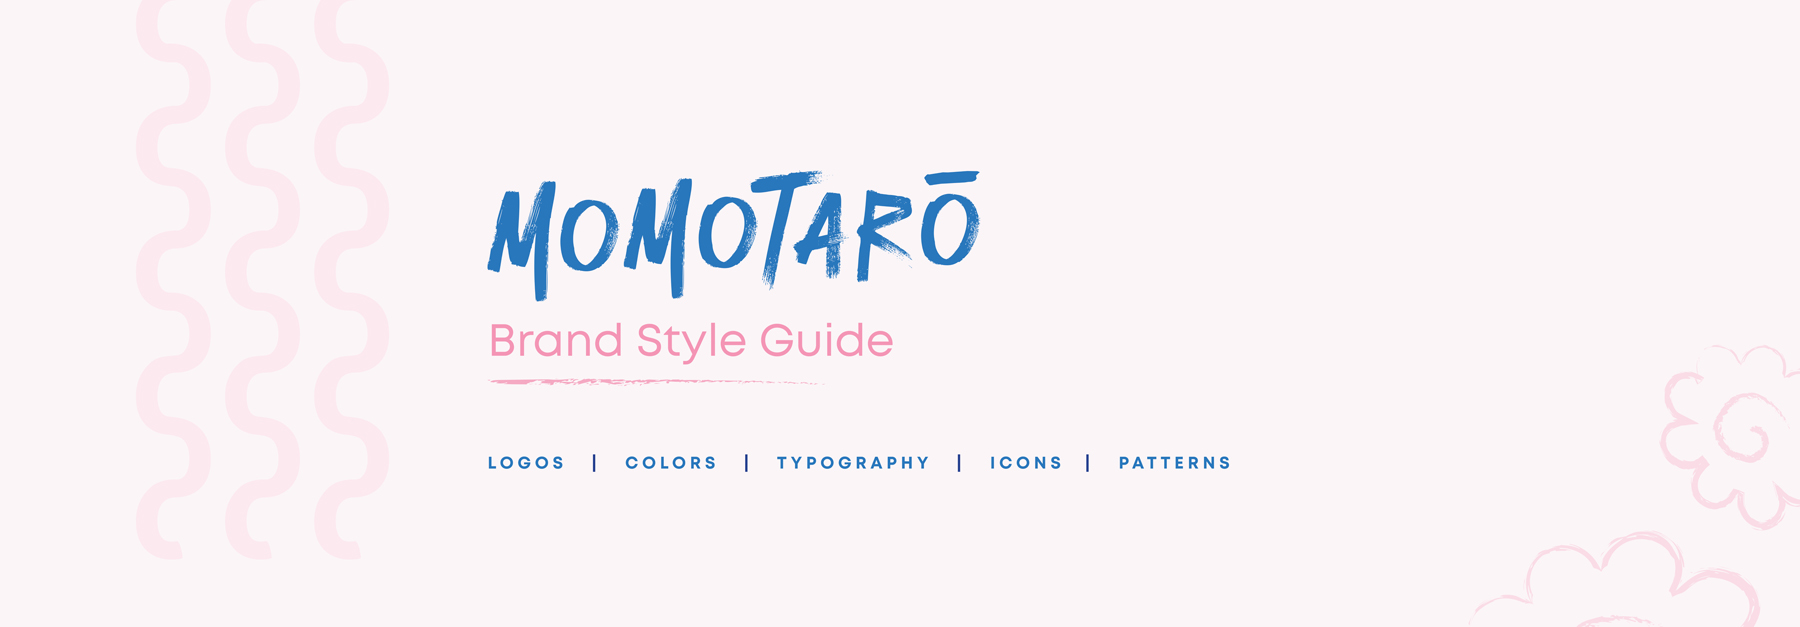 Momotaro's brand style guide cover